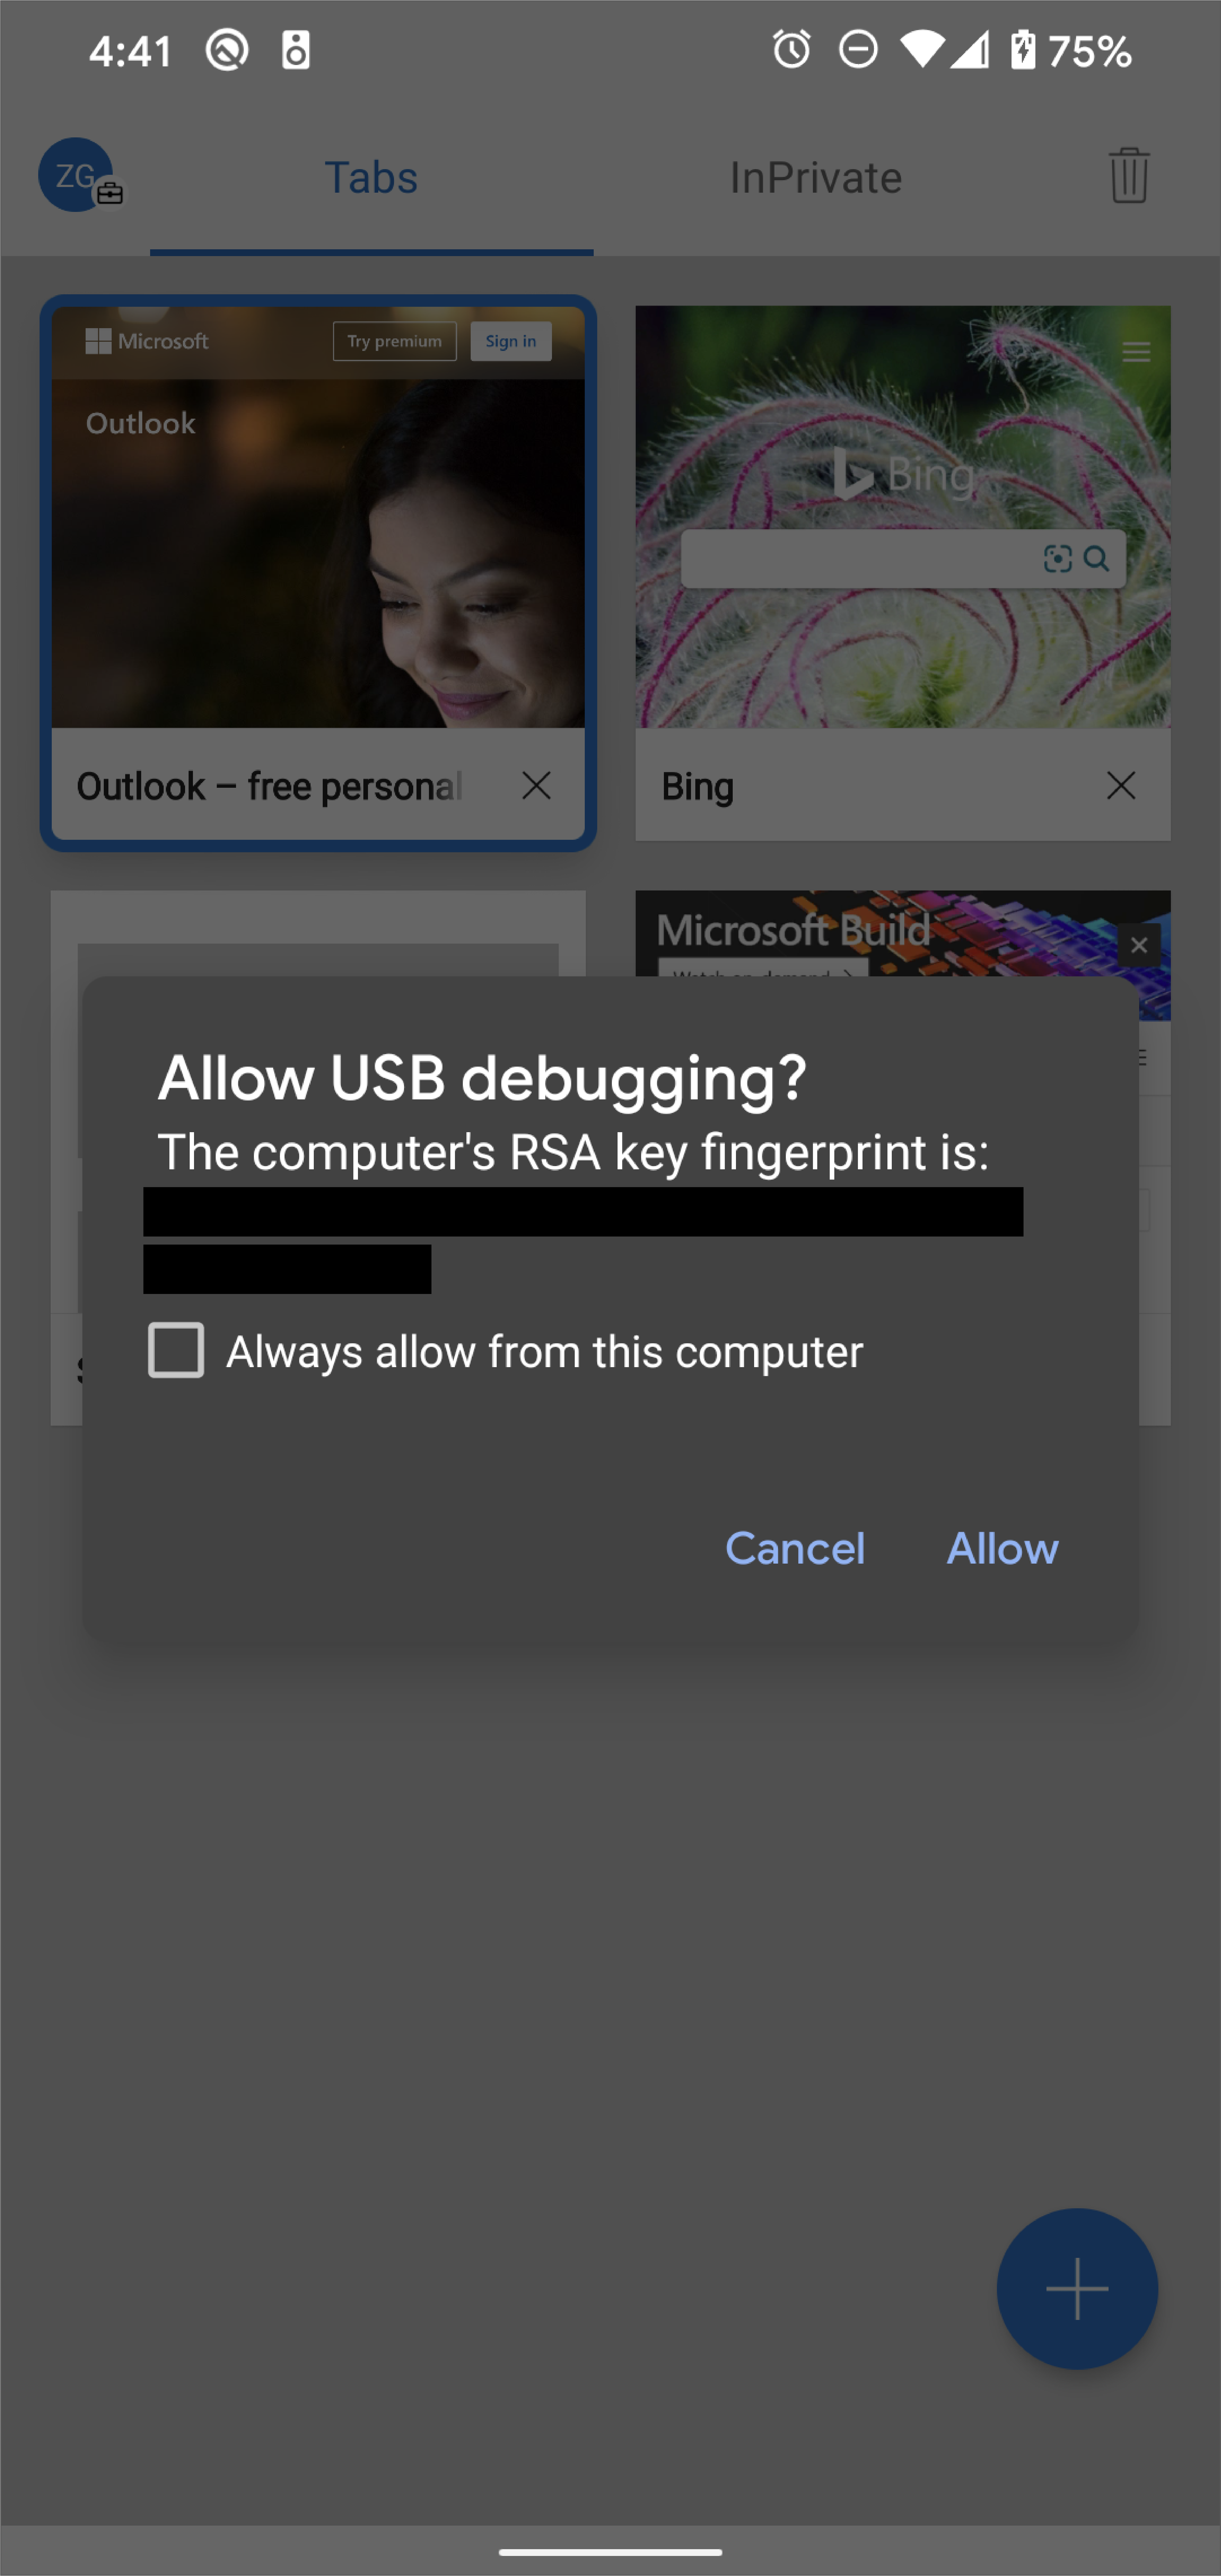 The Allow USB Debugging permission prompt on an Android device